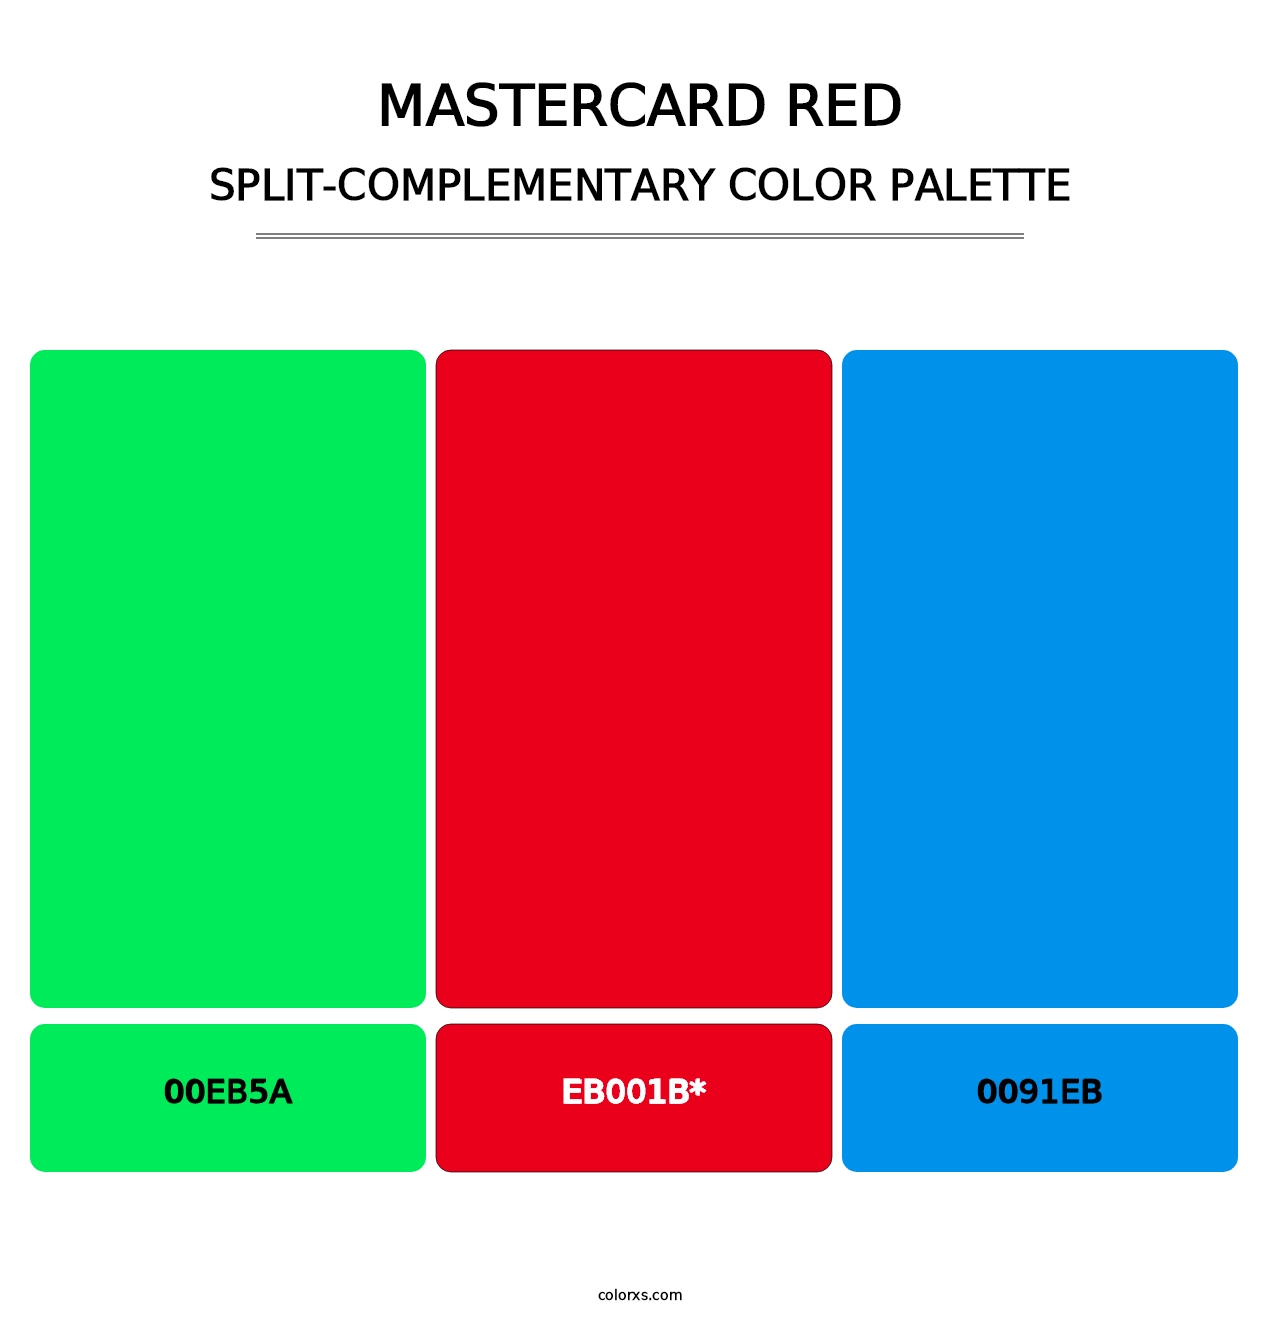 Mastercard Red - Split-Complementary Color Palette